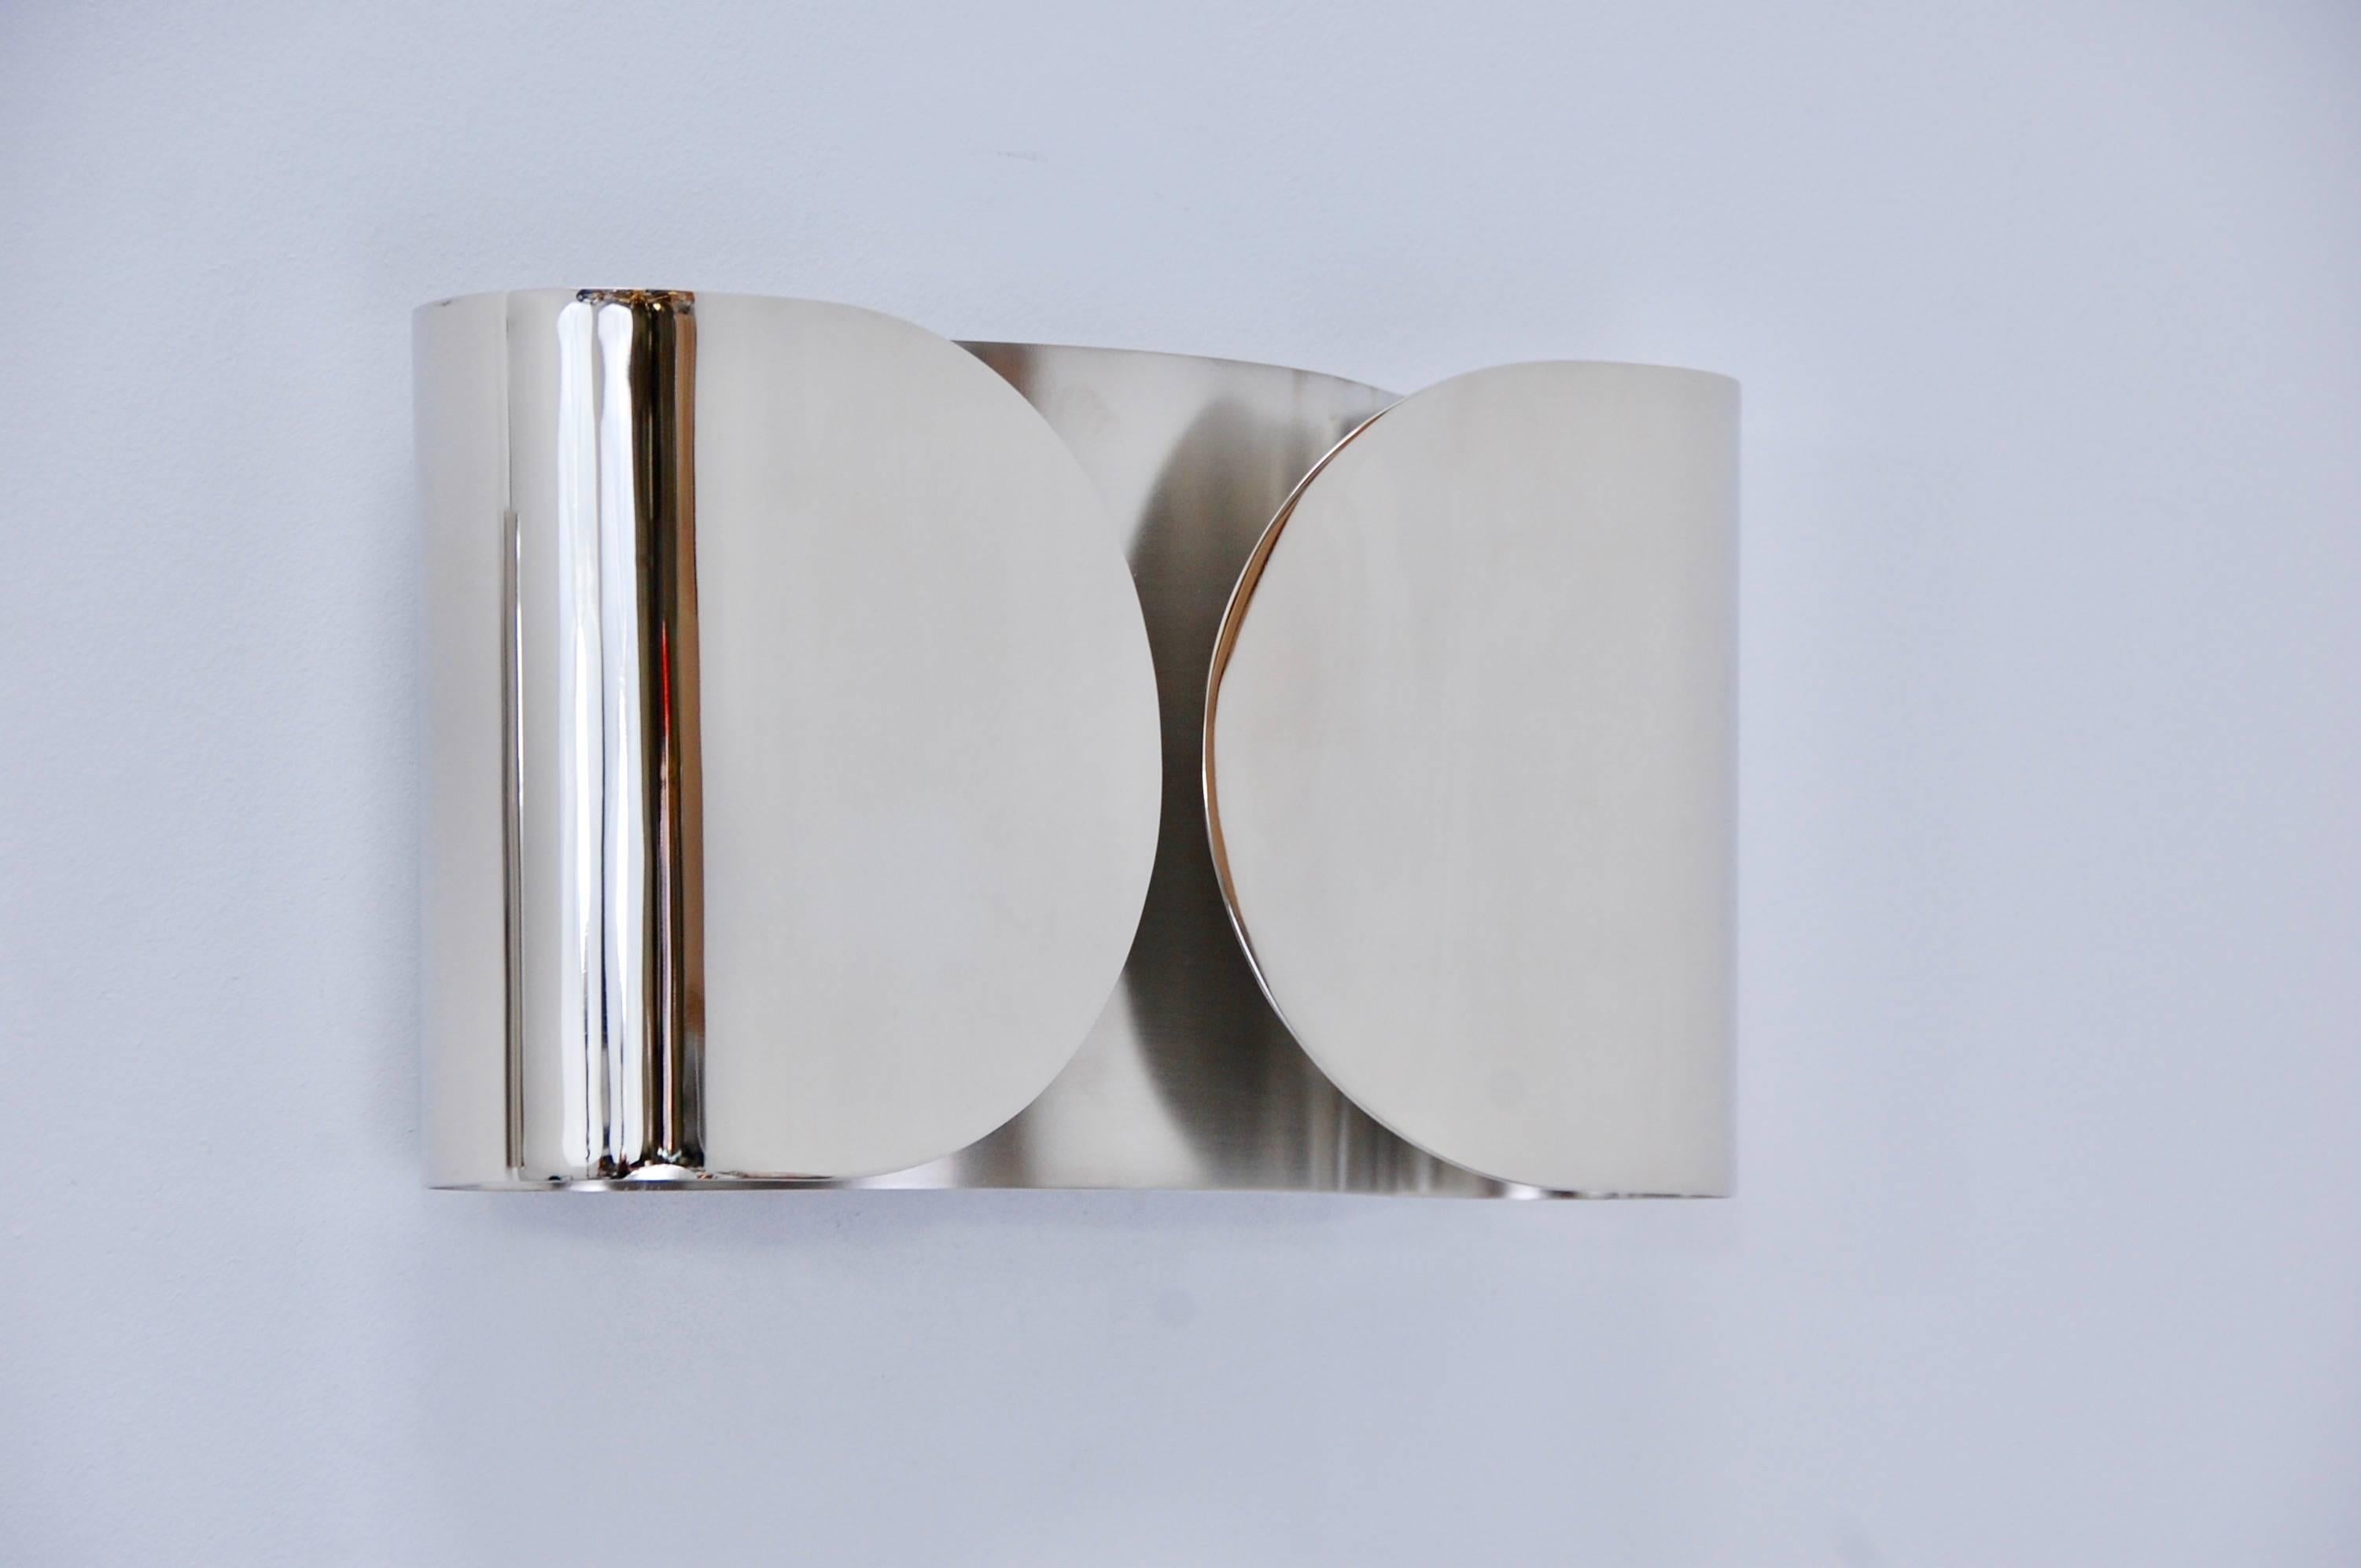 Phenomenal modern and sleek pair of Foglio sconces by Tobia Scarpa in satin nickel outside and lightly aged un-lacquered satin nickel finishes inside.